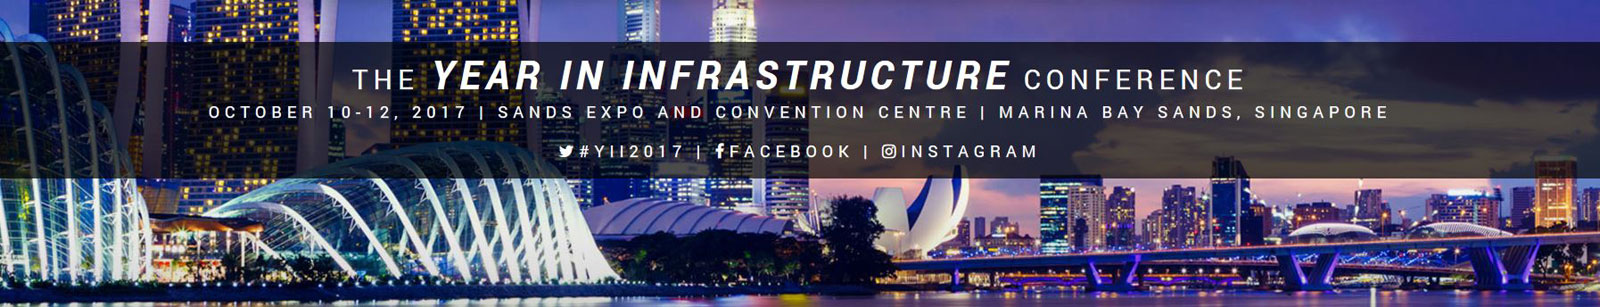 Be inspired Singapore 2017